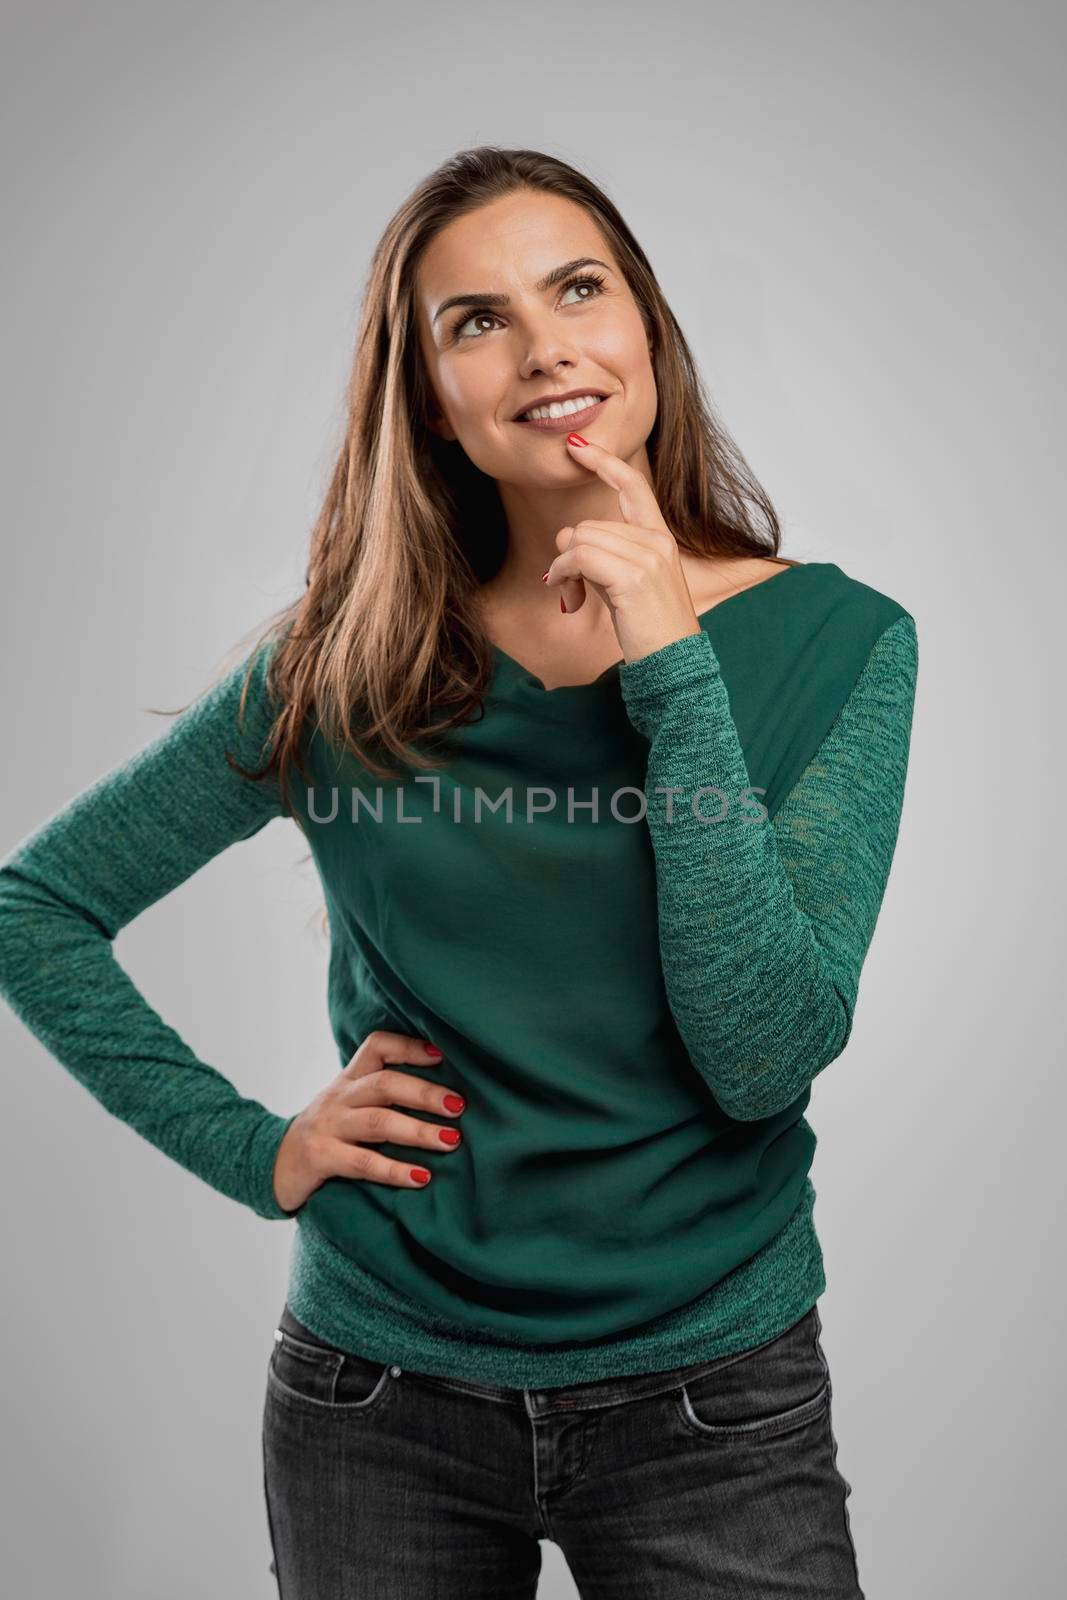 Beautiful woman smiling and with her hand on the chin thinking on something